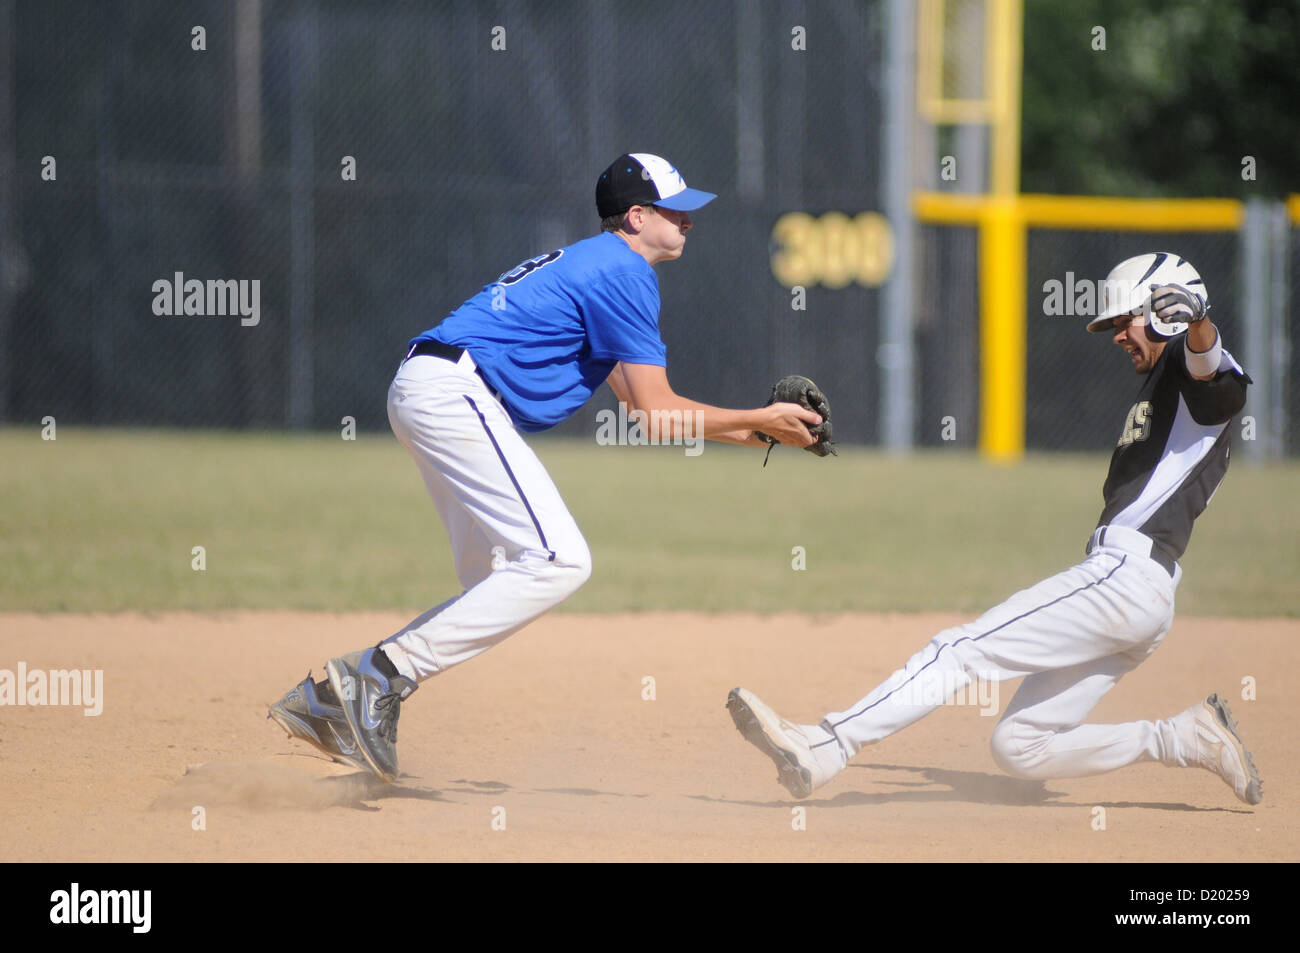 Baseball Middle infielder takes a throw to force out a sliding base runner  high school game. USA Stock Photo - Alamy